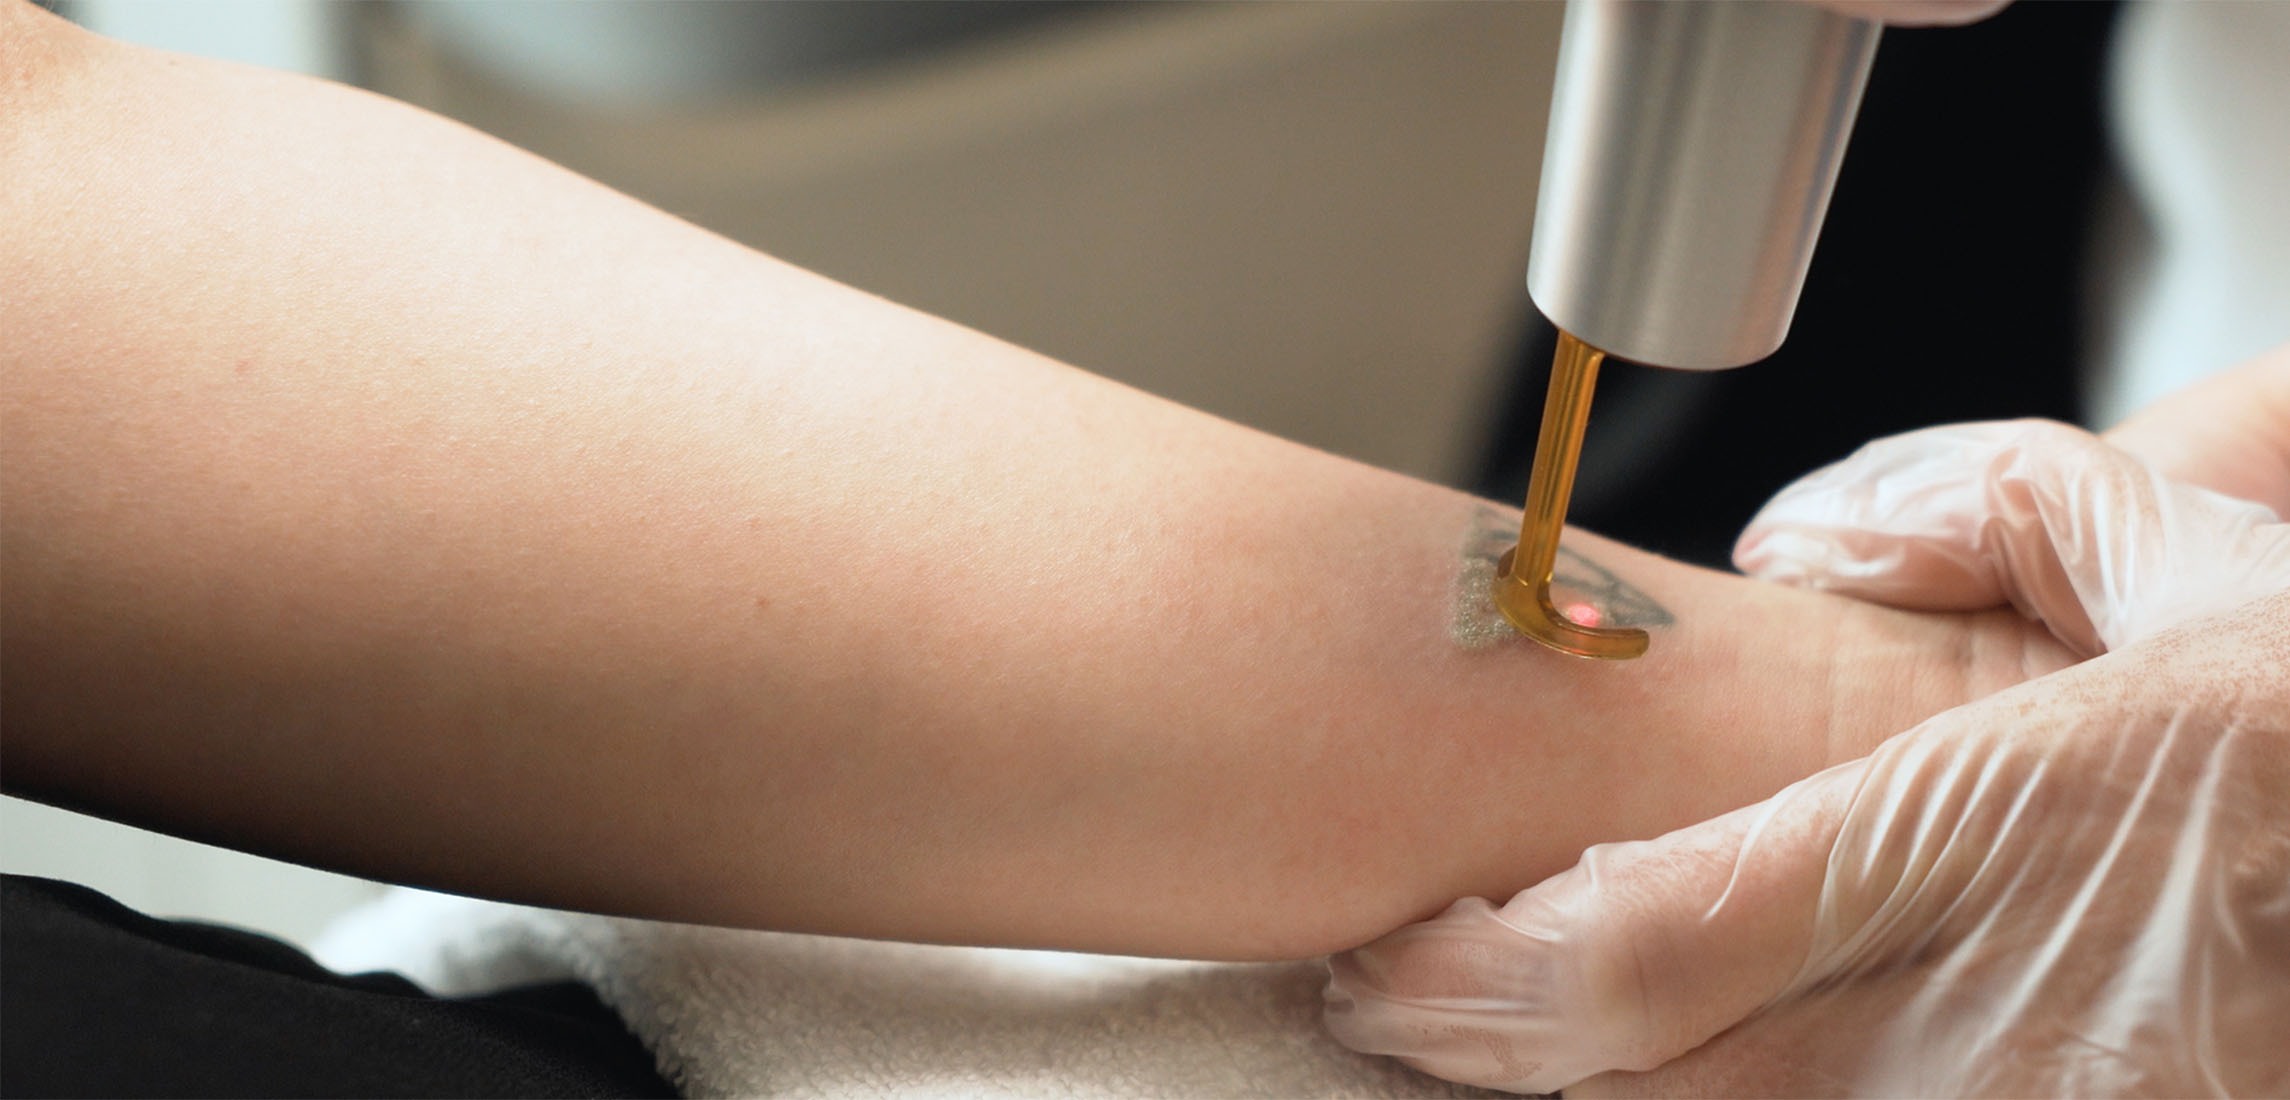 Laser Tattoo Removal In San Diego | La Jolla Cosmetic Laser Clinic